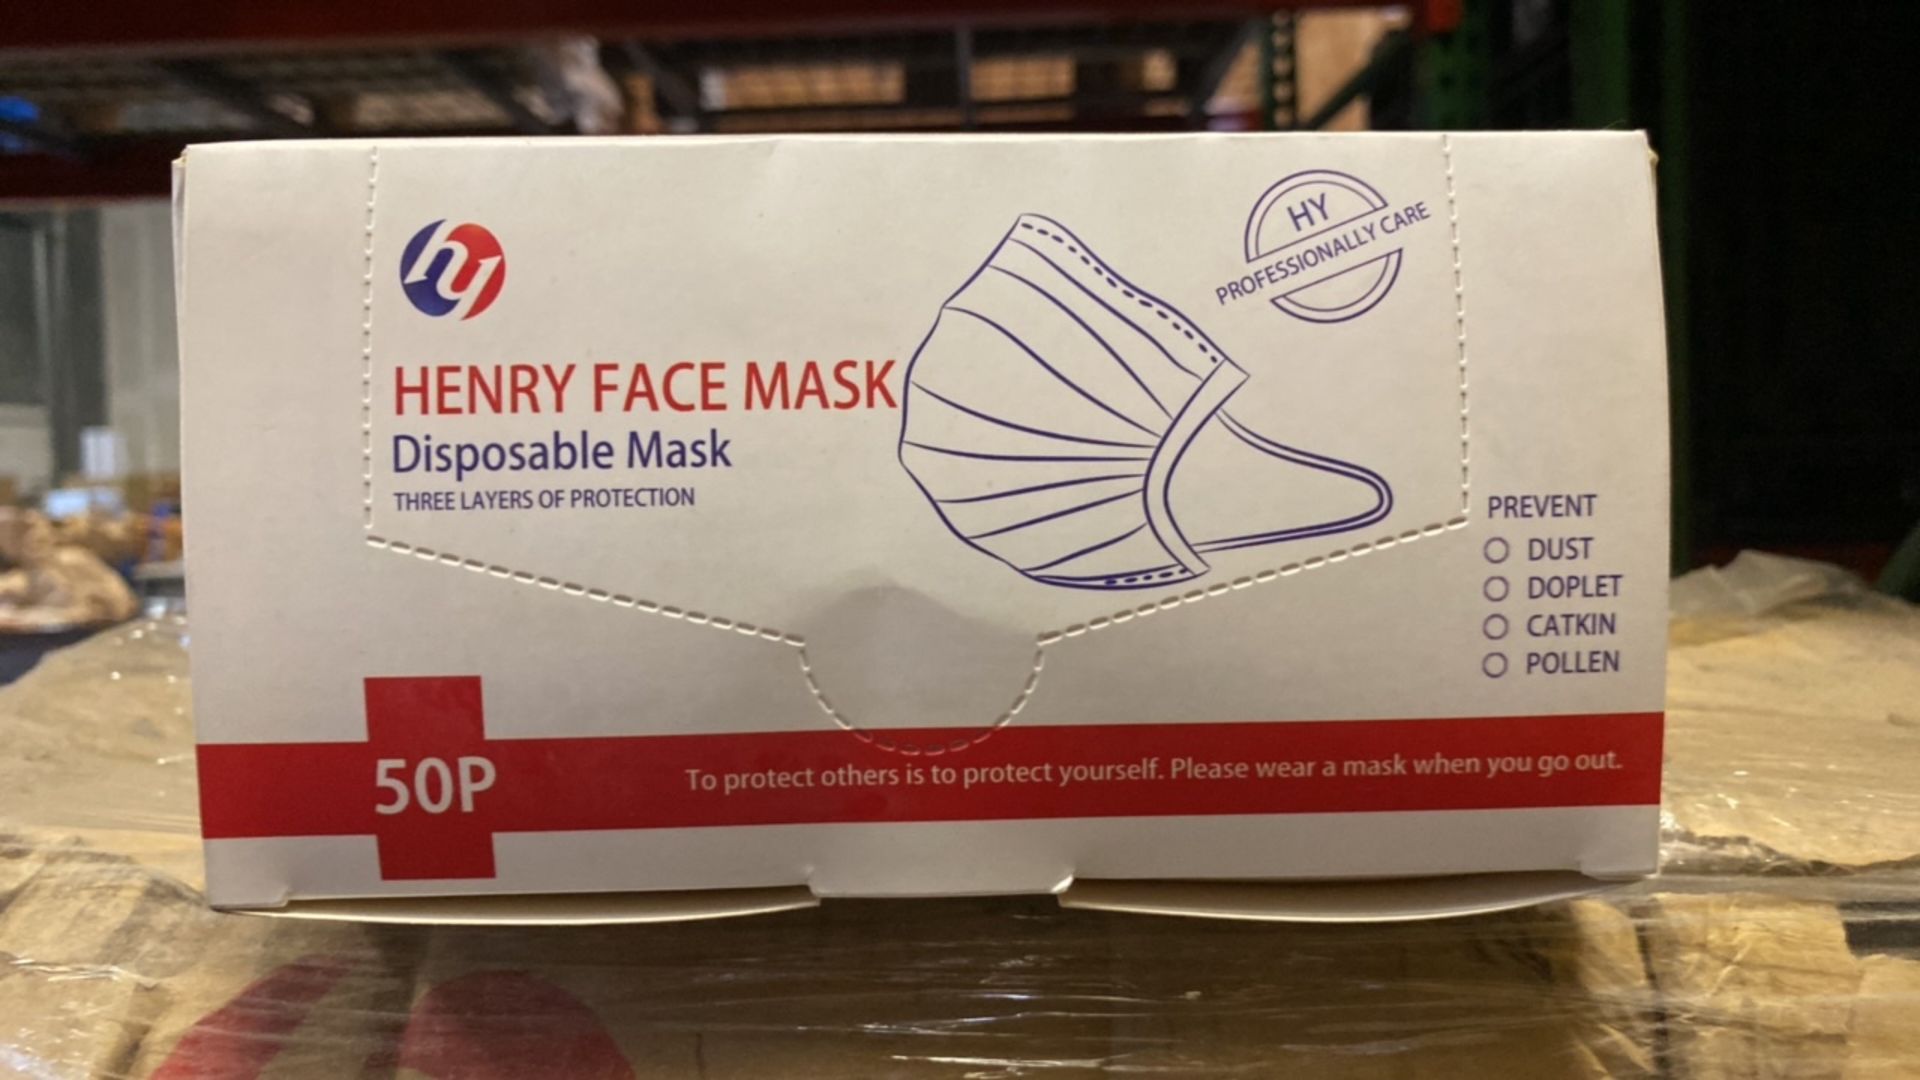 HENRY 50P NON-MEDICAL EARLOOP FACE MASK QTY:90000 UNITS